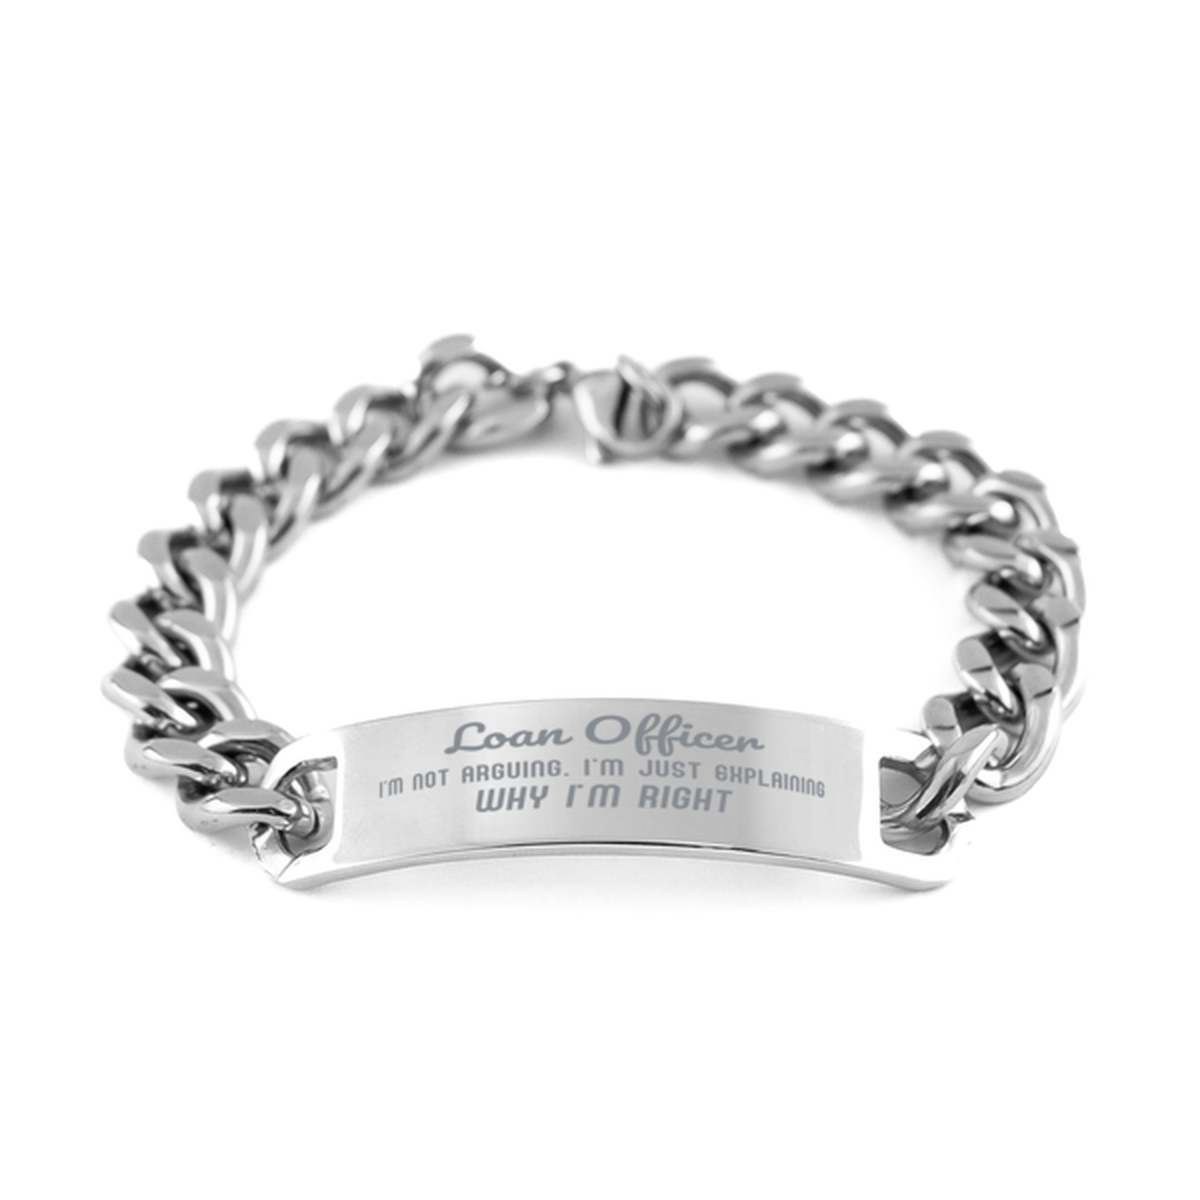 Loan Officer I'm not Arguing. I'm Just Explaining Why I'm RIGHT Cuban Chain Stainless Steel Bracelet, Graduation Birthday Christmas Loan Officer Gifts For Loan Officer Funny Saying Quote Present for Men Women Coworker